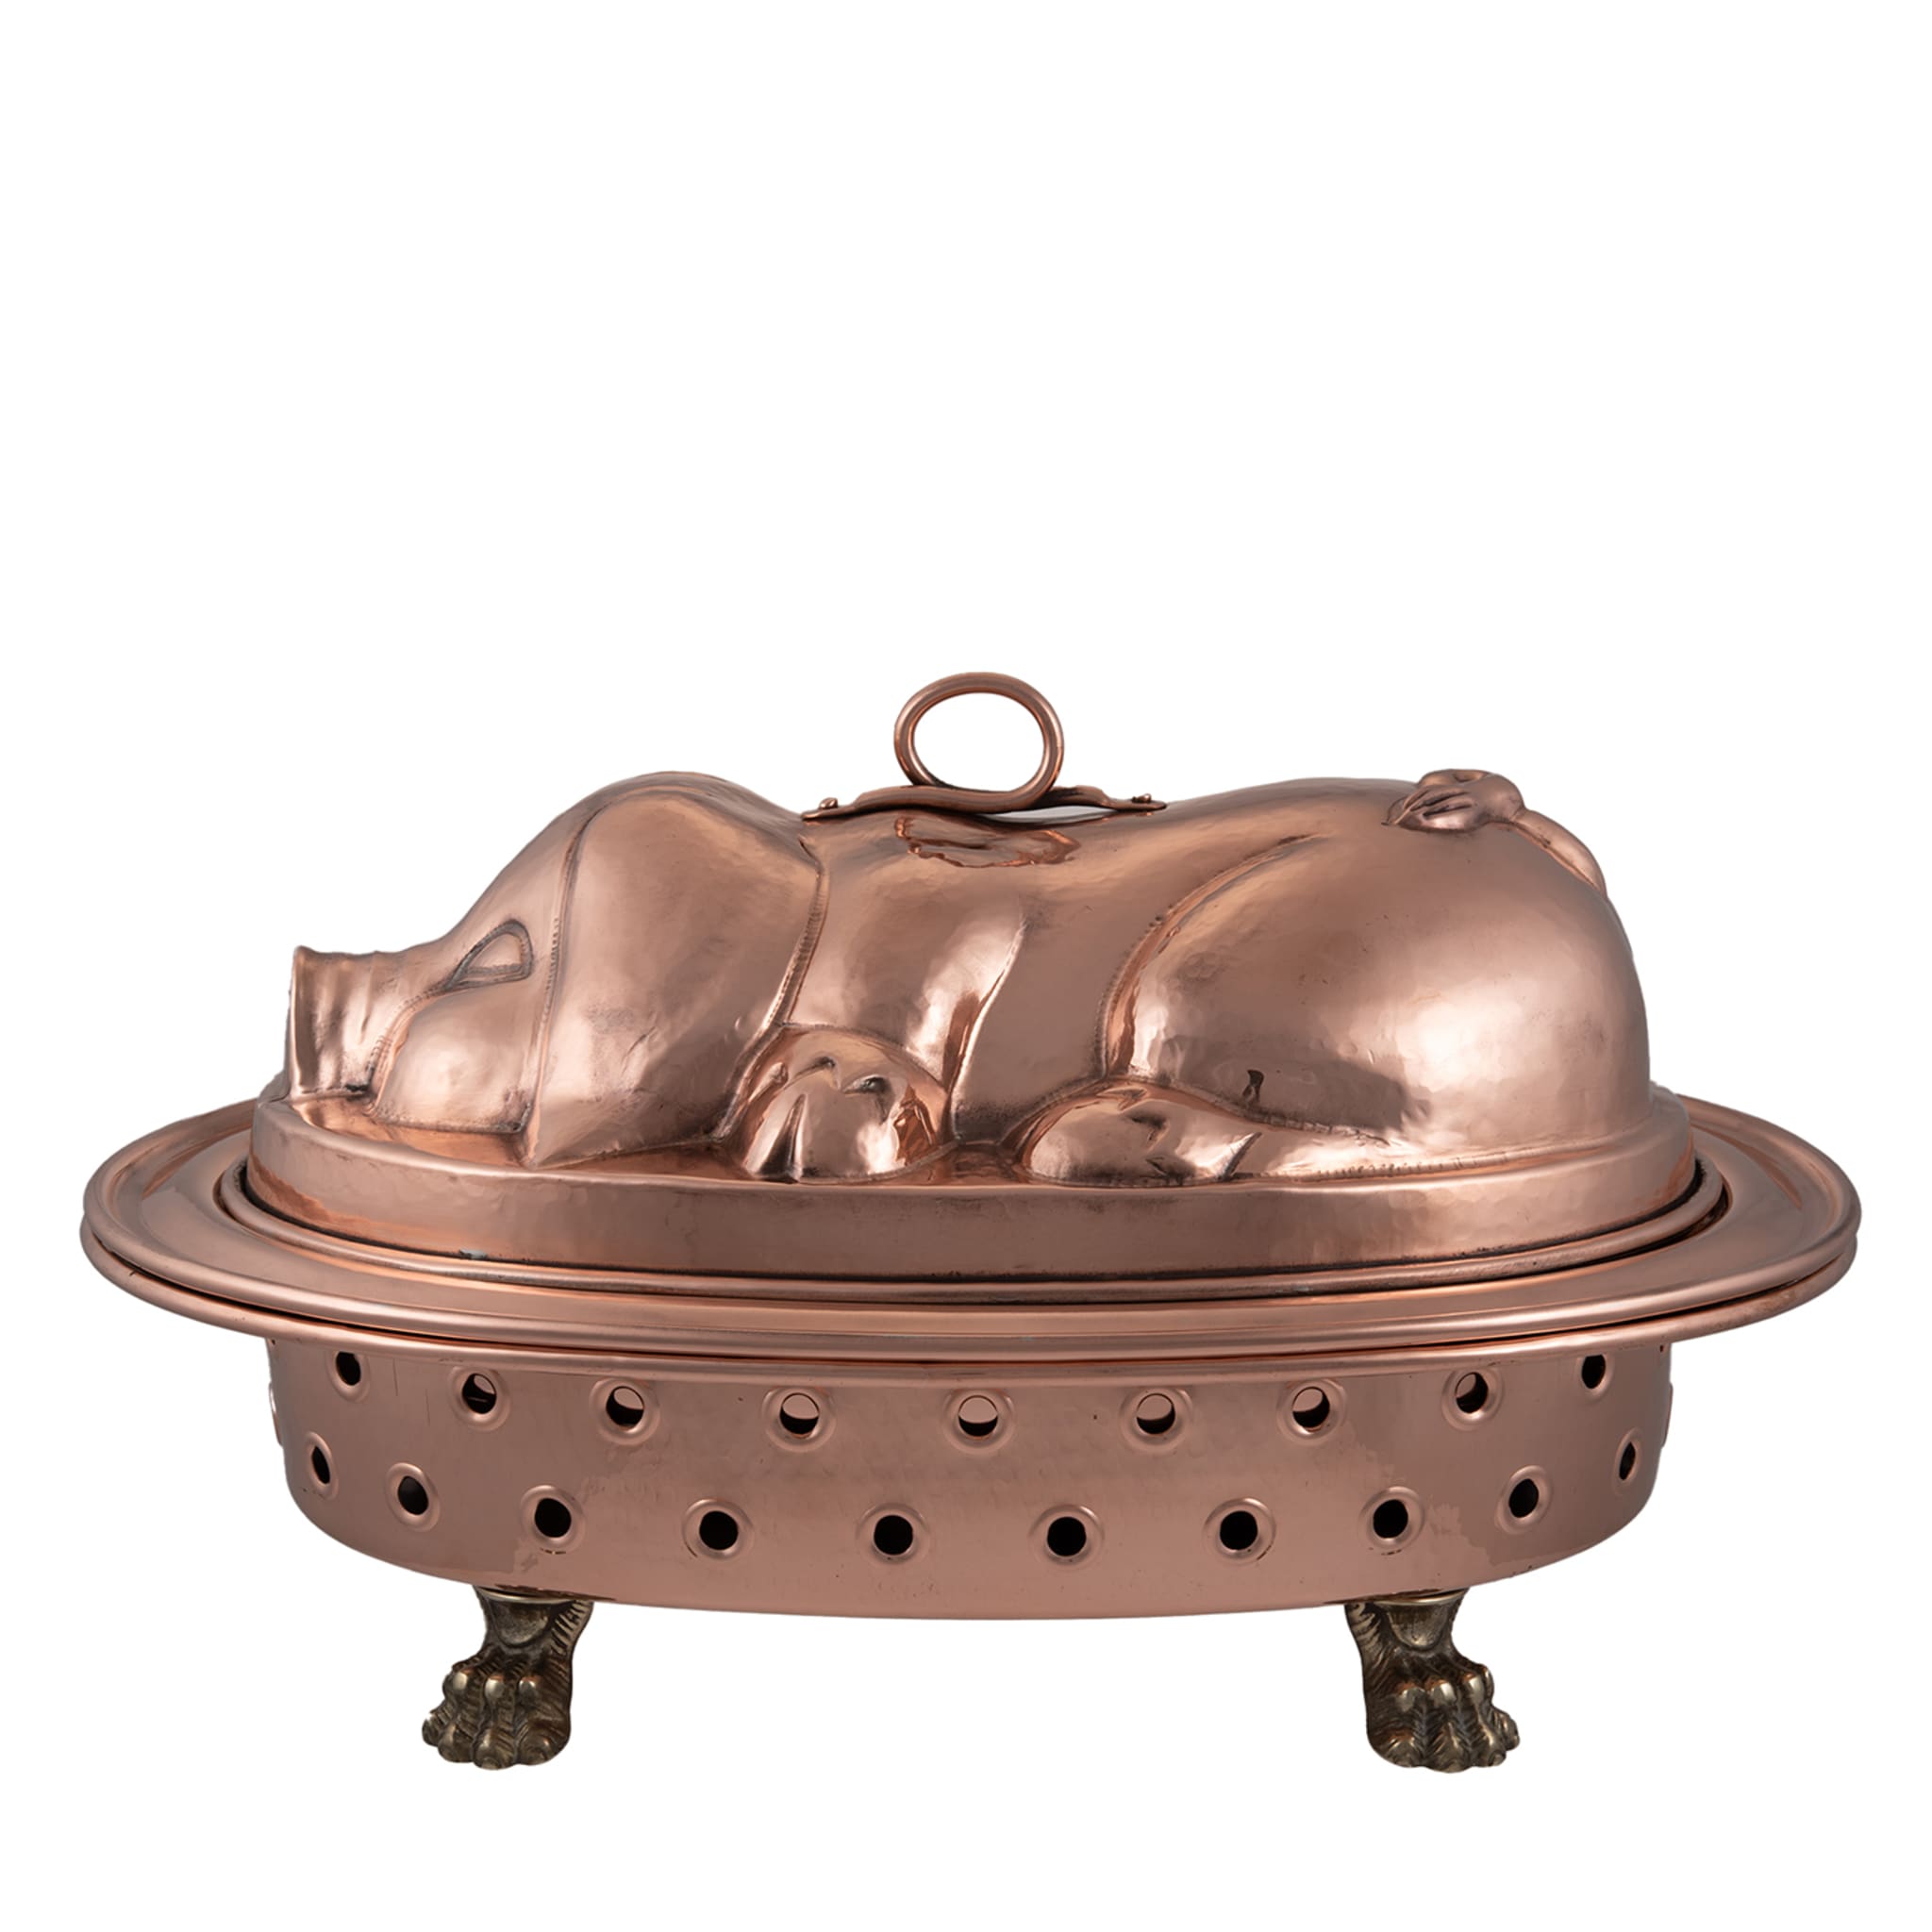 Pig-Shaped Copper Chafing Dish - Main view